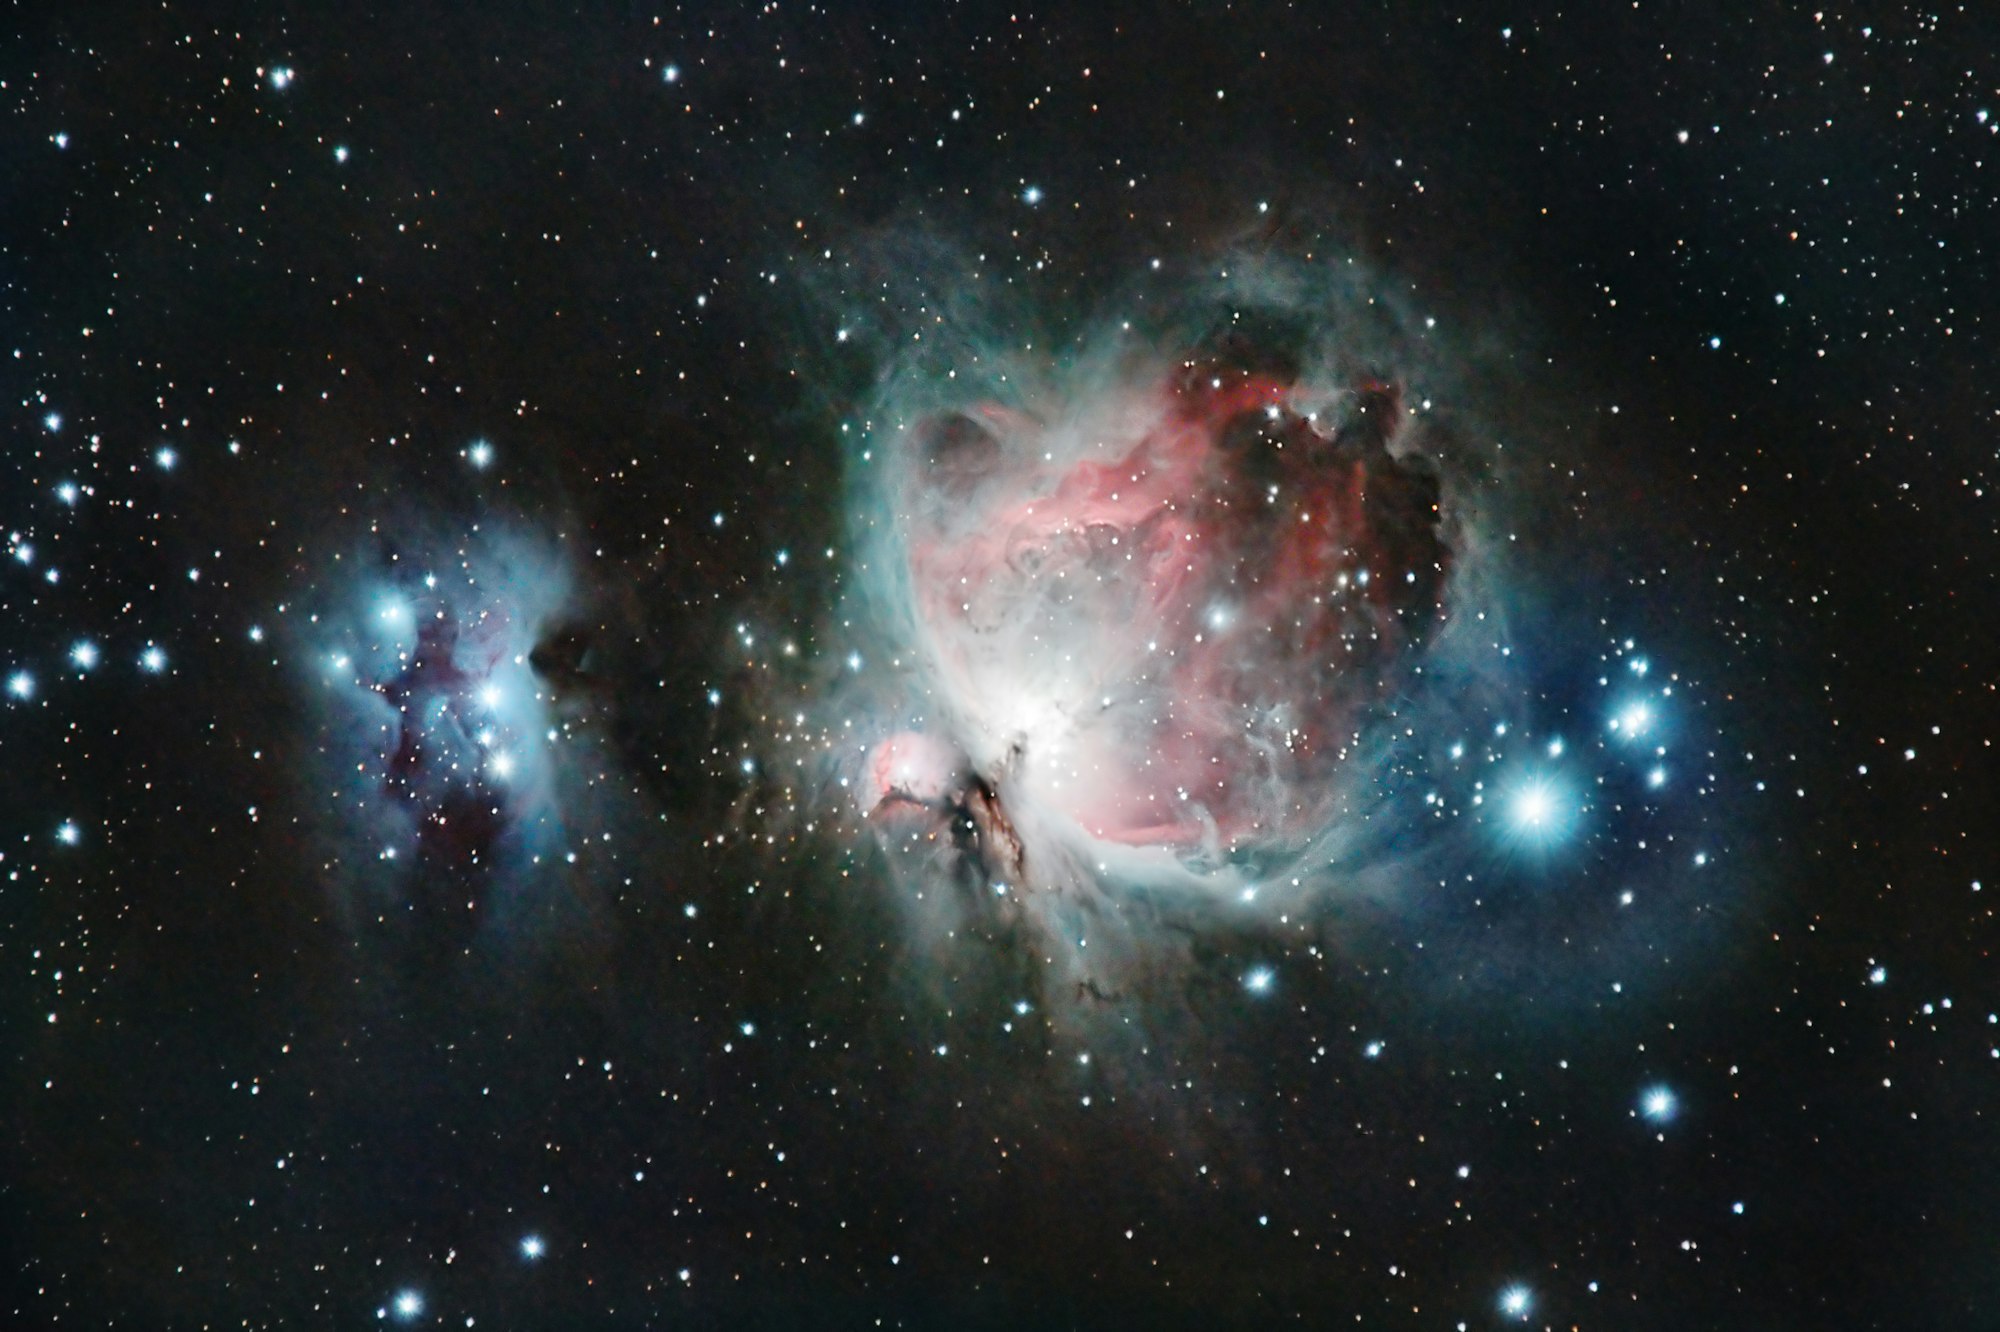 Bright Orion nebula, or M42 in deep space